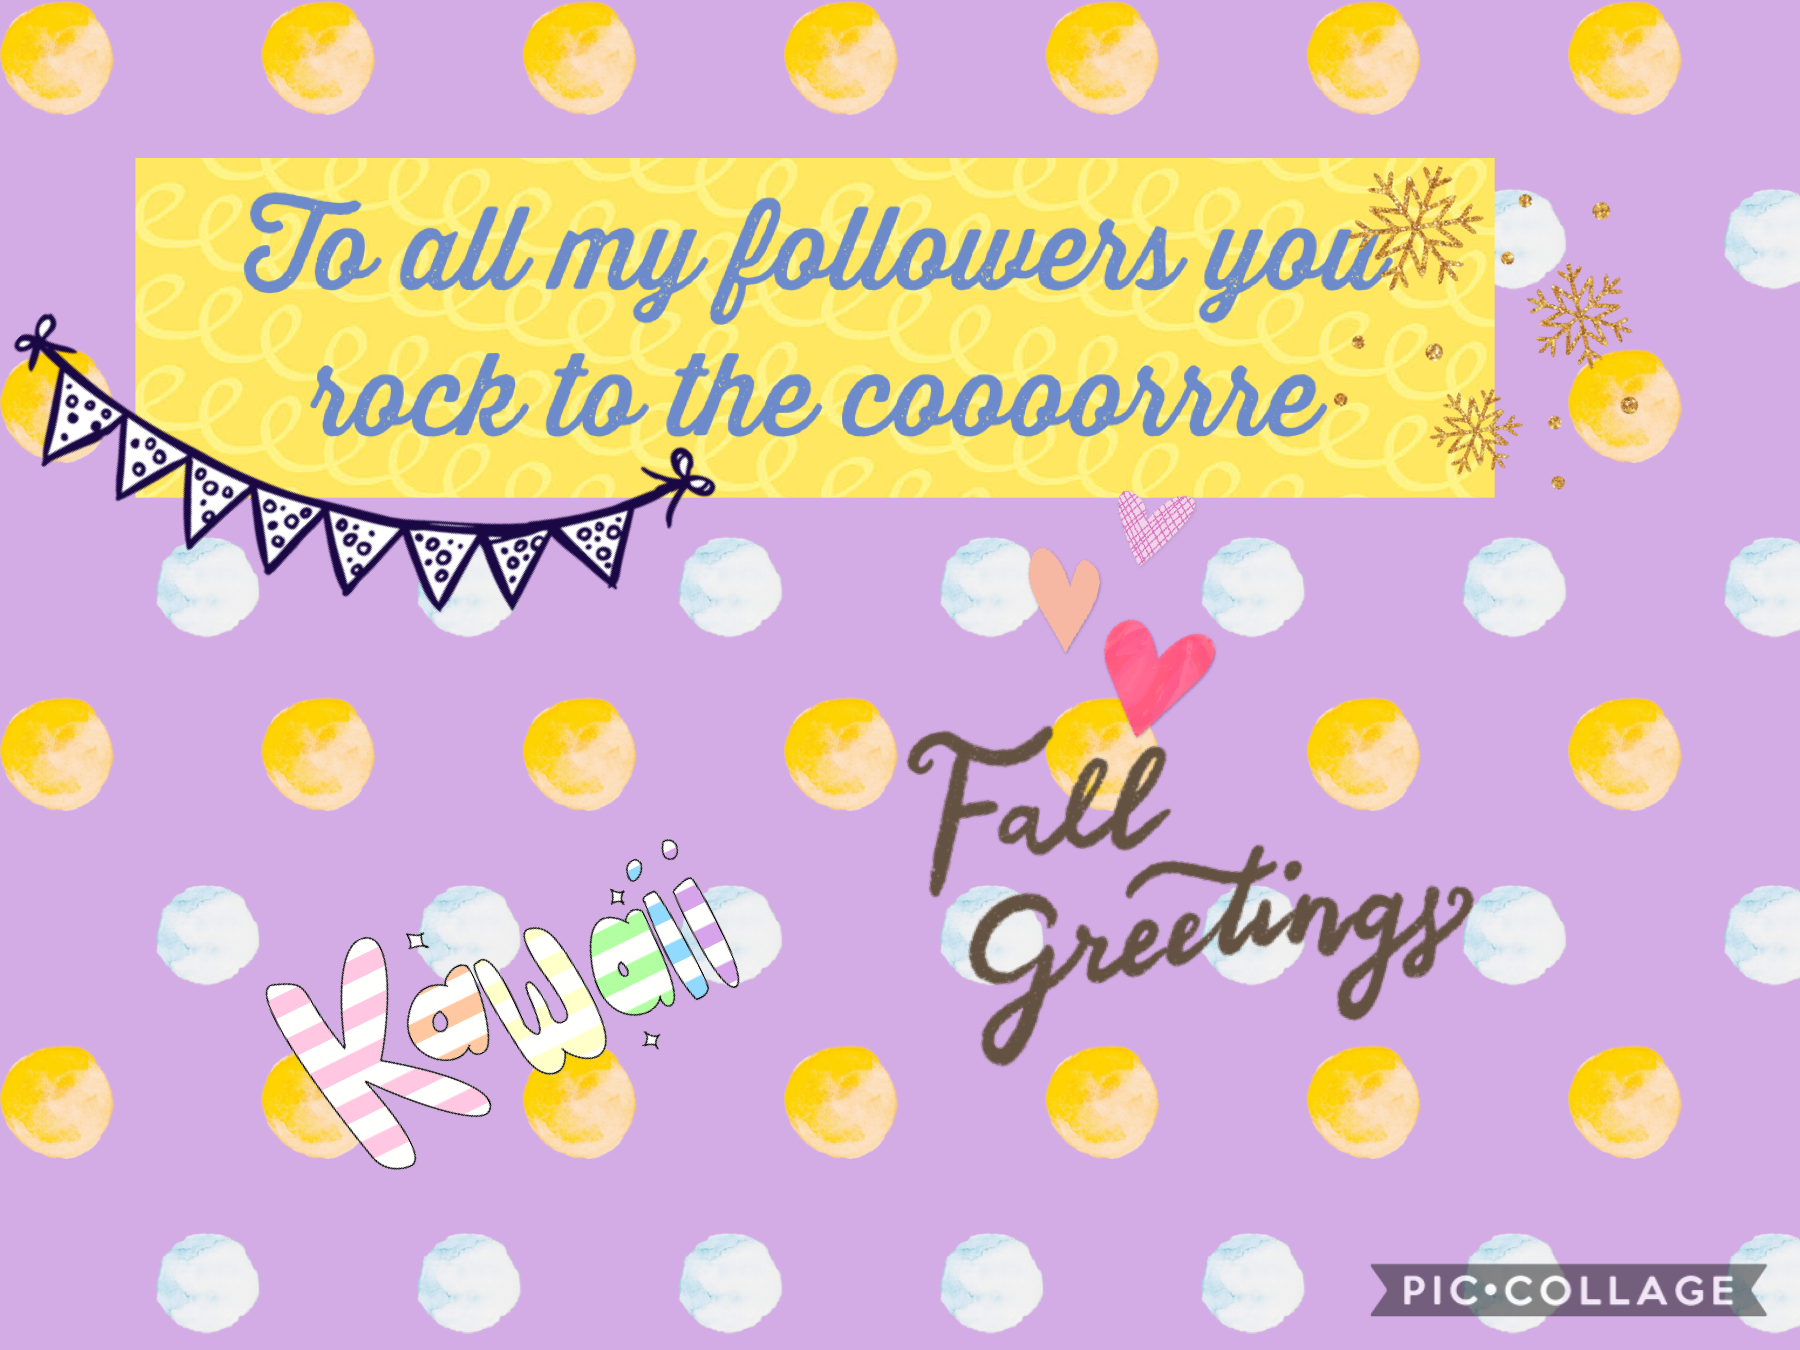 Follower+anniversary = Folliversary so today will be a Folliversary from now a continuing.